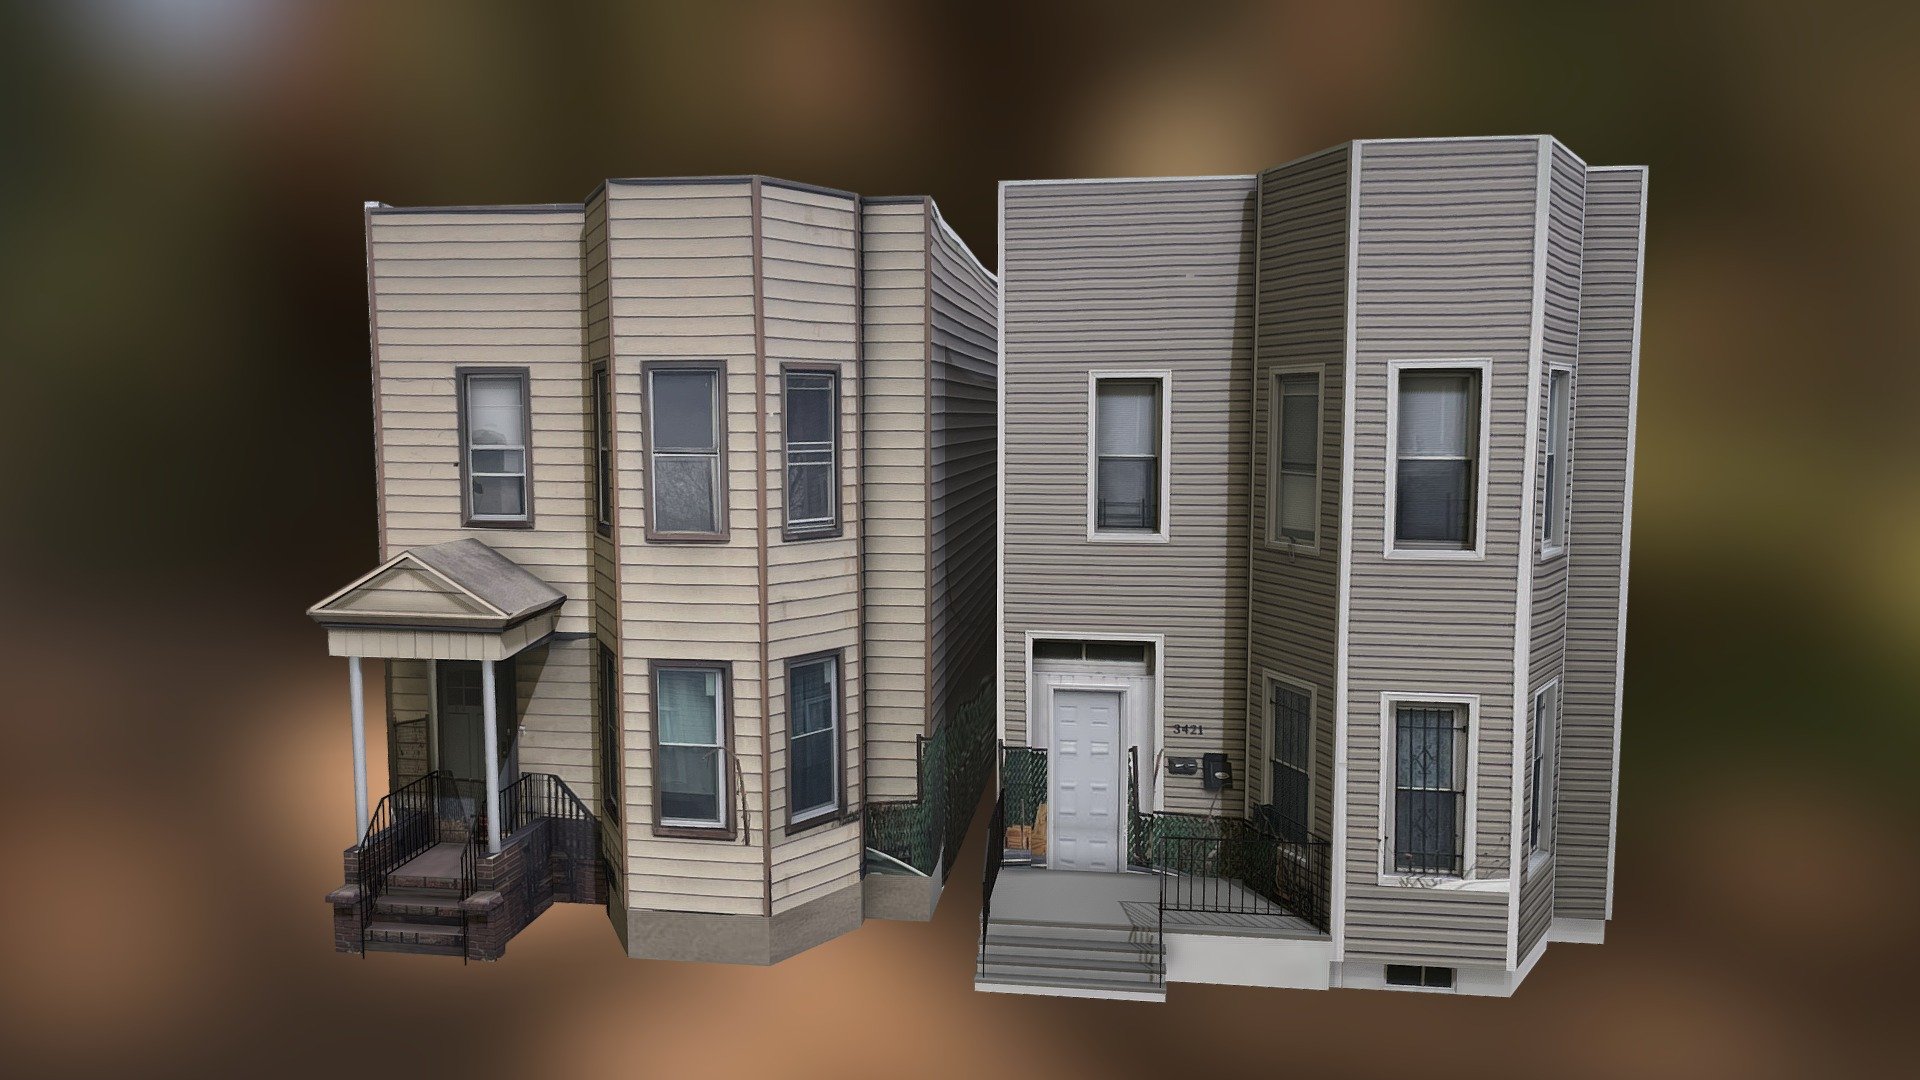 Modeled from two real world buildings. All textures photographed by me 3d model